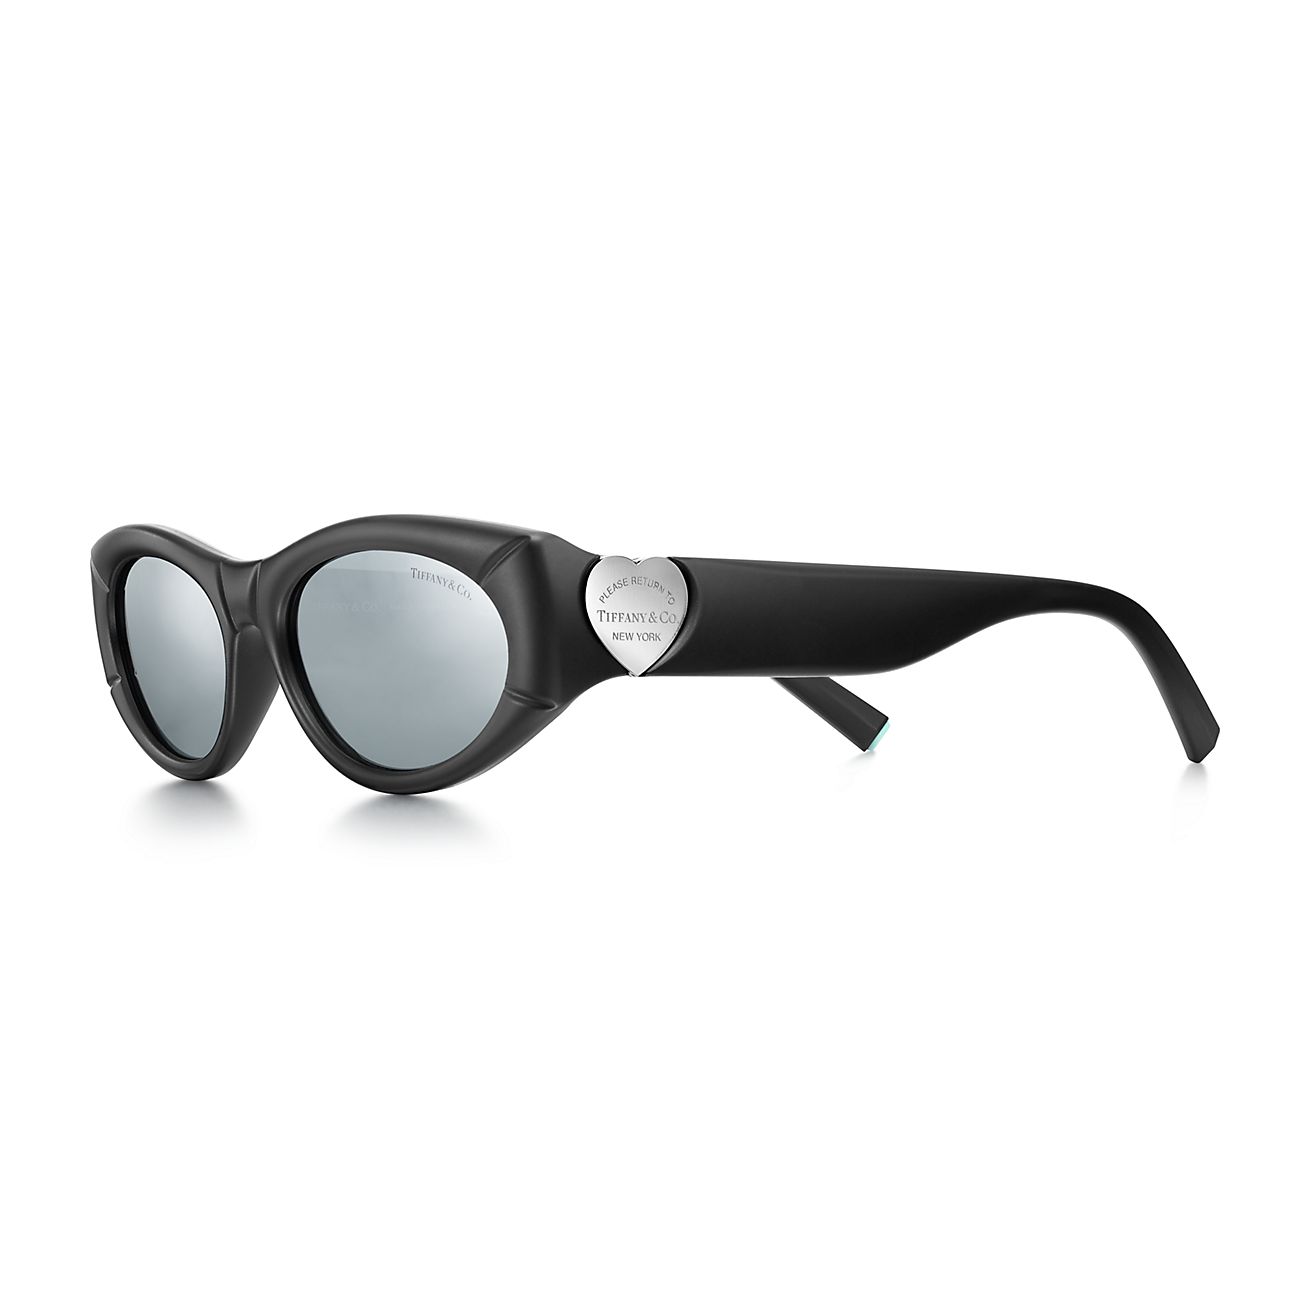 Return to Tiffany® Sunglasses in Black Acetate with Gray Mirrored Lenses |  Tiffany & Co.